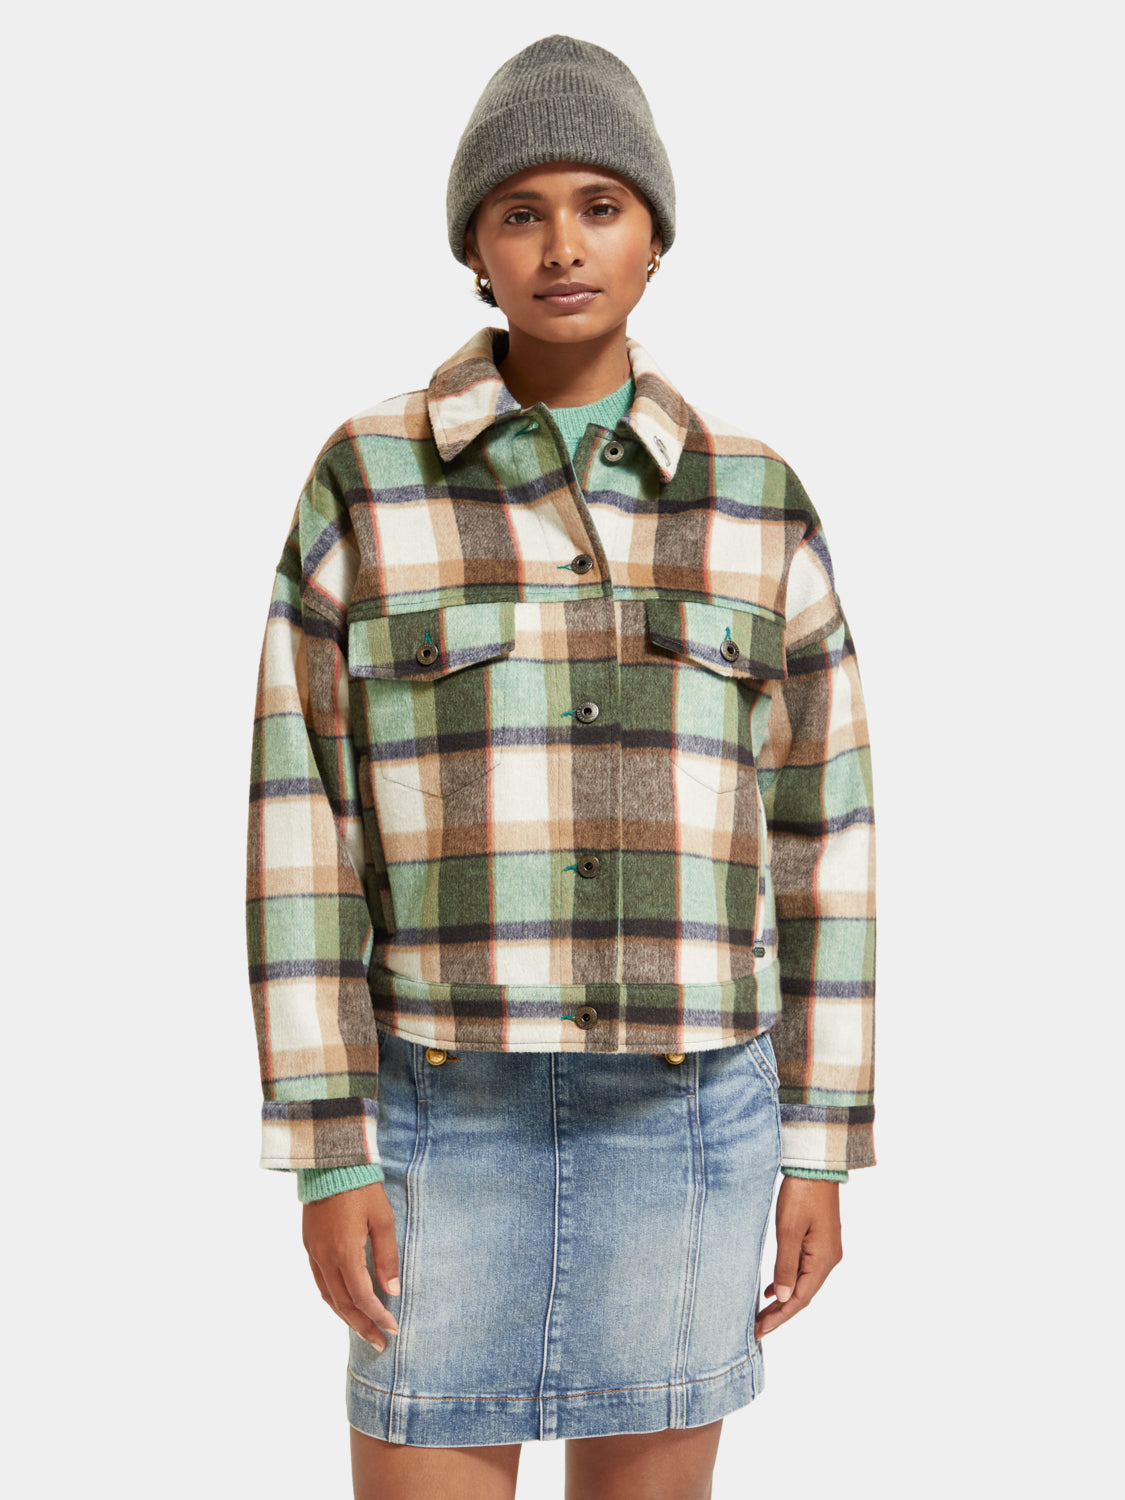 Wool blend checked jacket - Frozen mint check